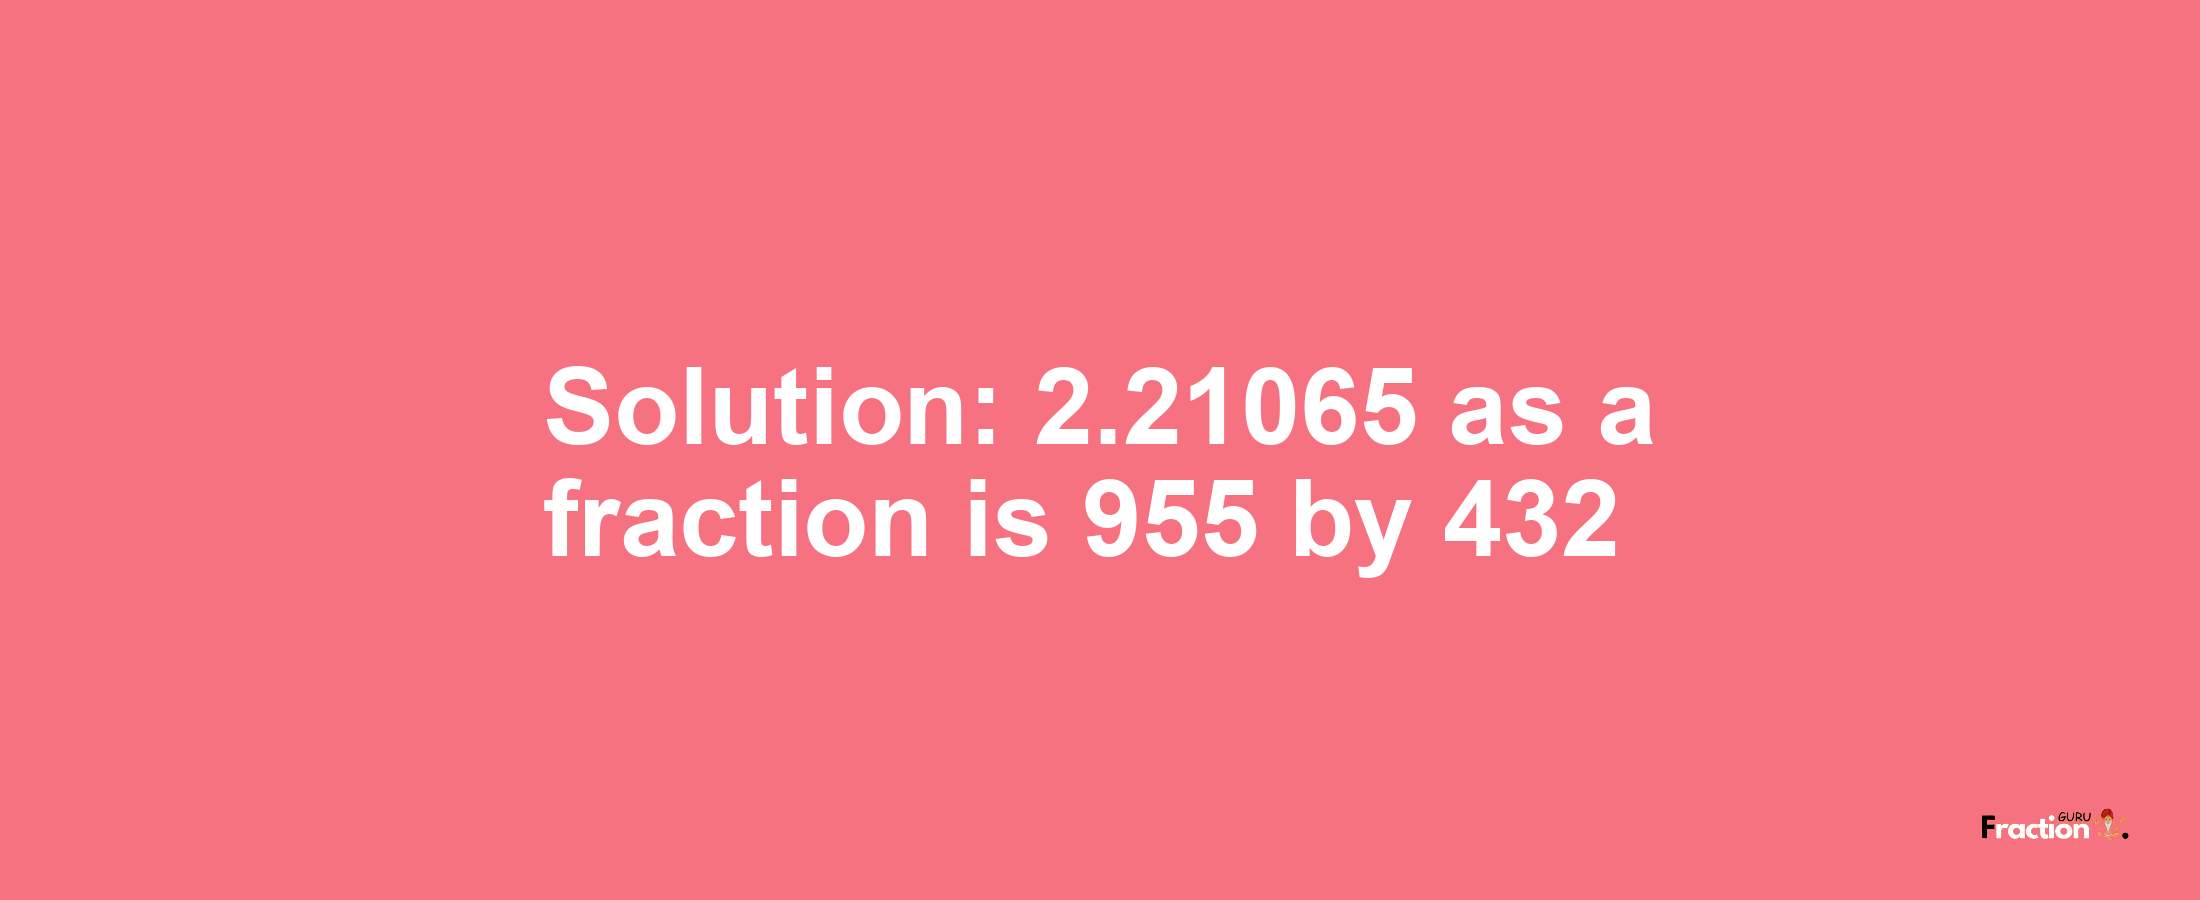 Solution:2.21065 as a fraction is 955/432